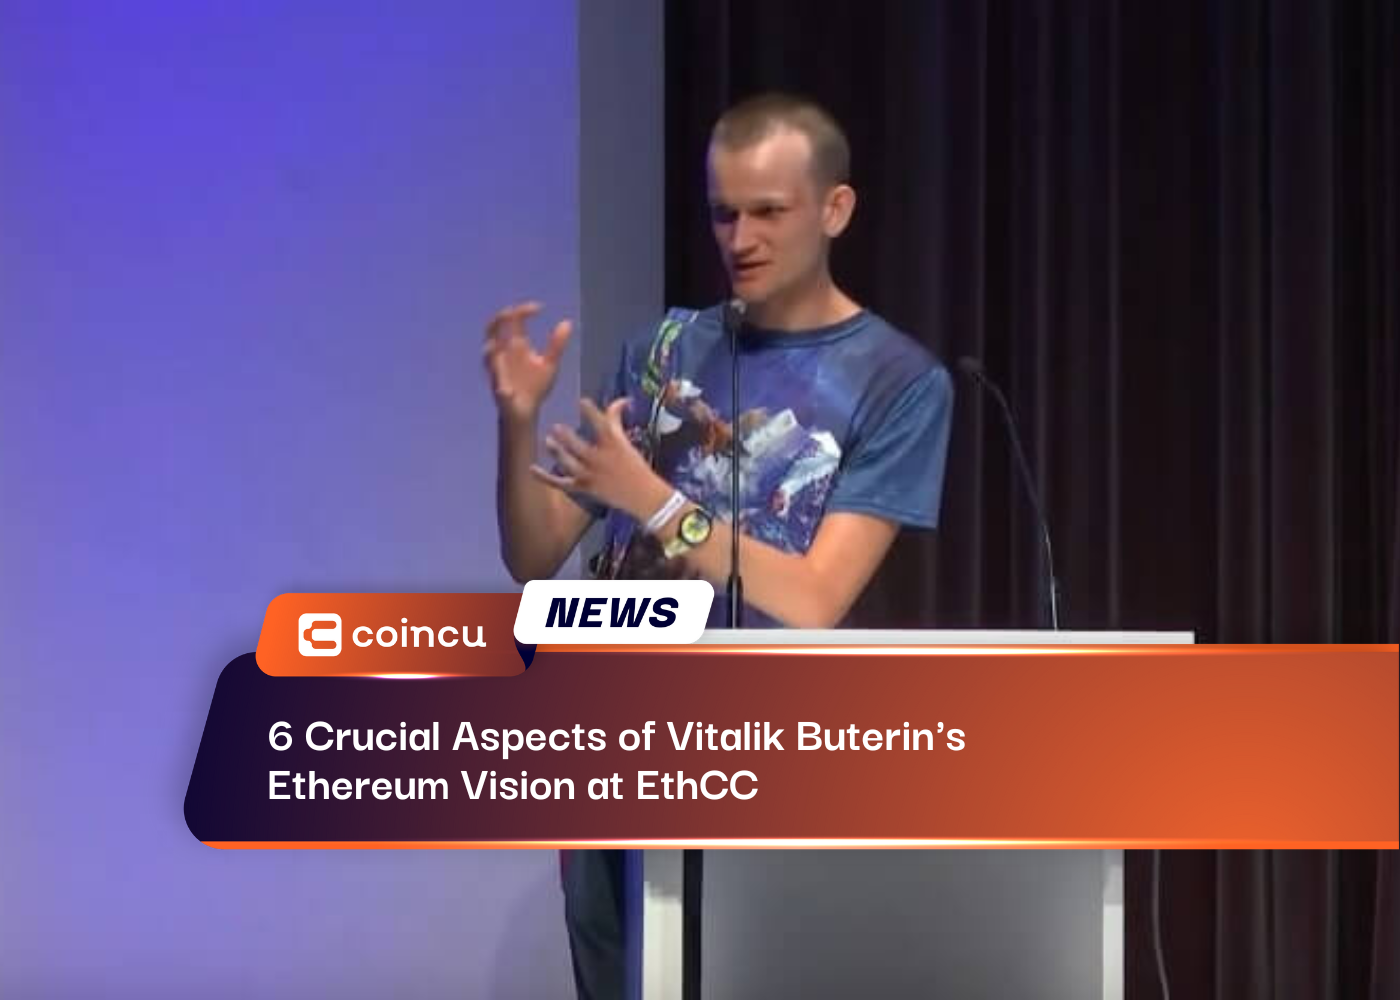 6 Crucial Aspects of Vitalik Buterin's Ethereum Vision at EthCC